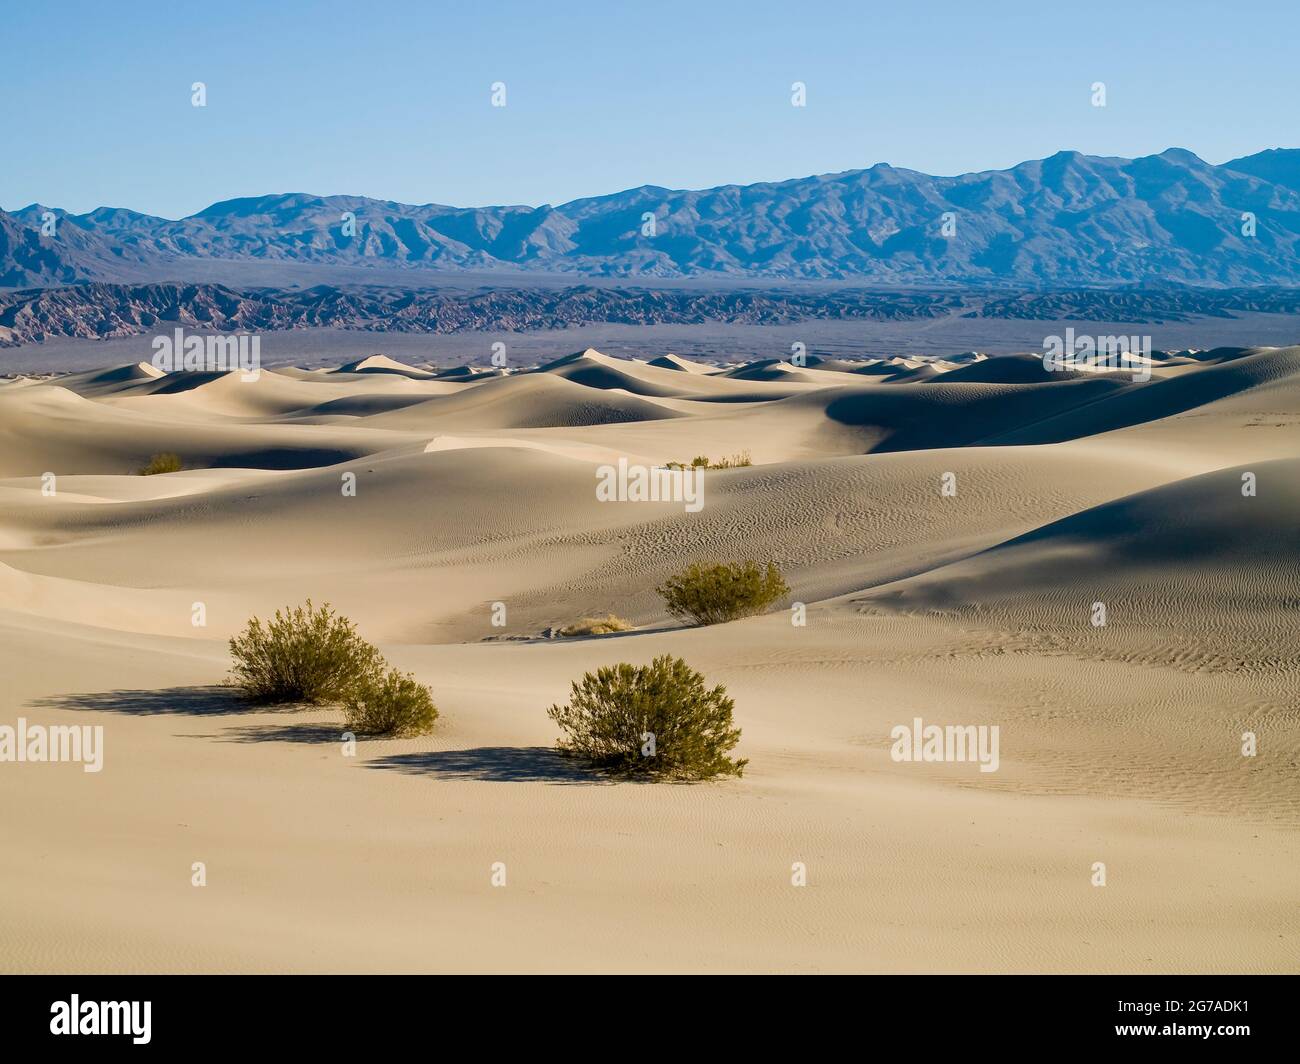 Stovepipe Wells Sand Dunes, Death Valley National Park, California, USA, Stock Photo